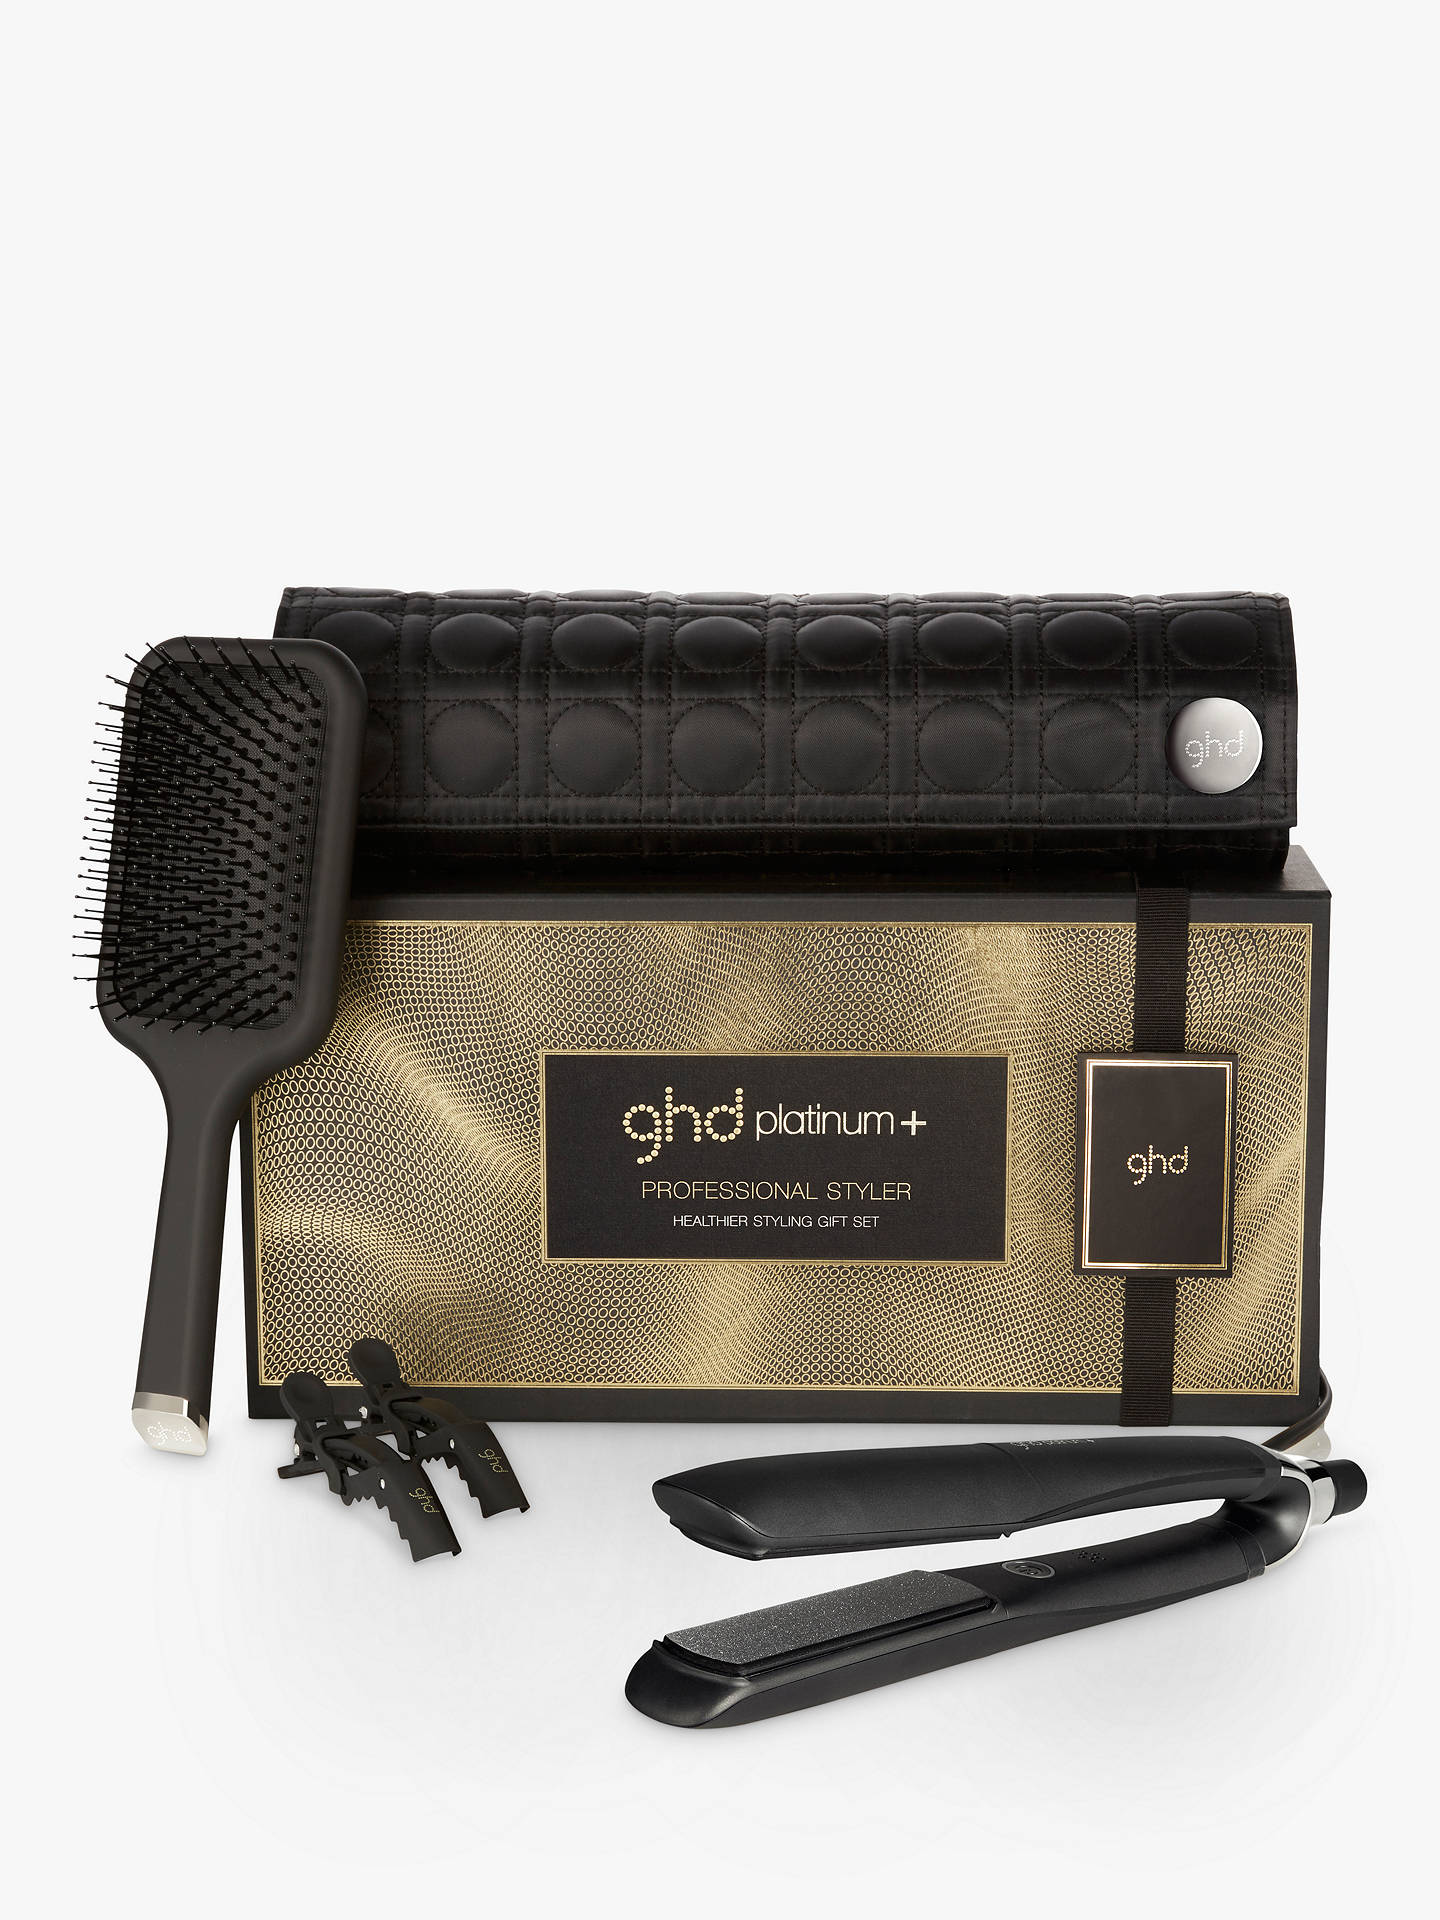 Where to get ghd straighteners